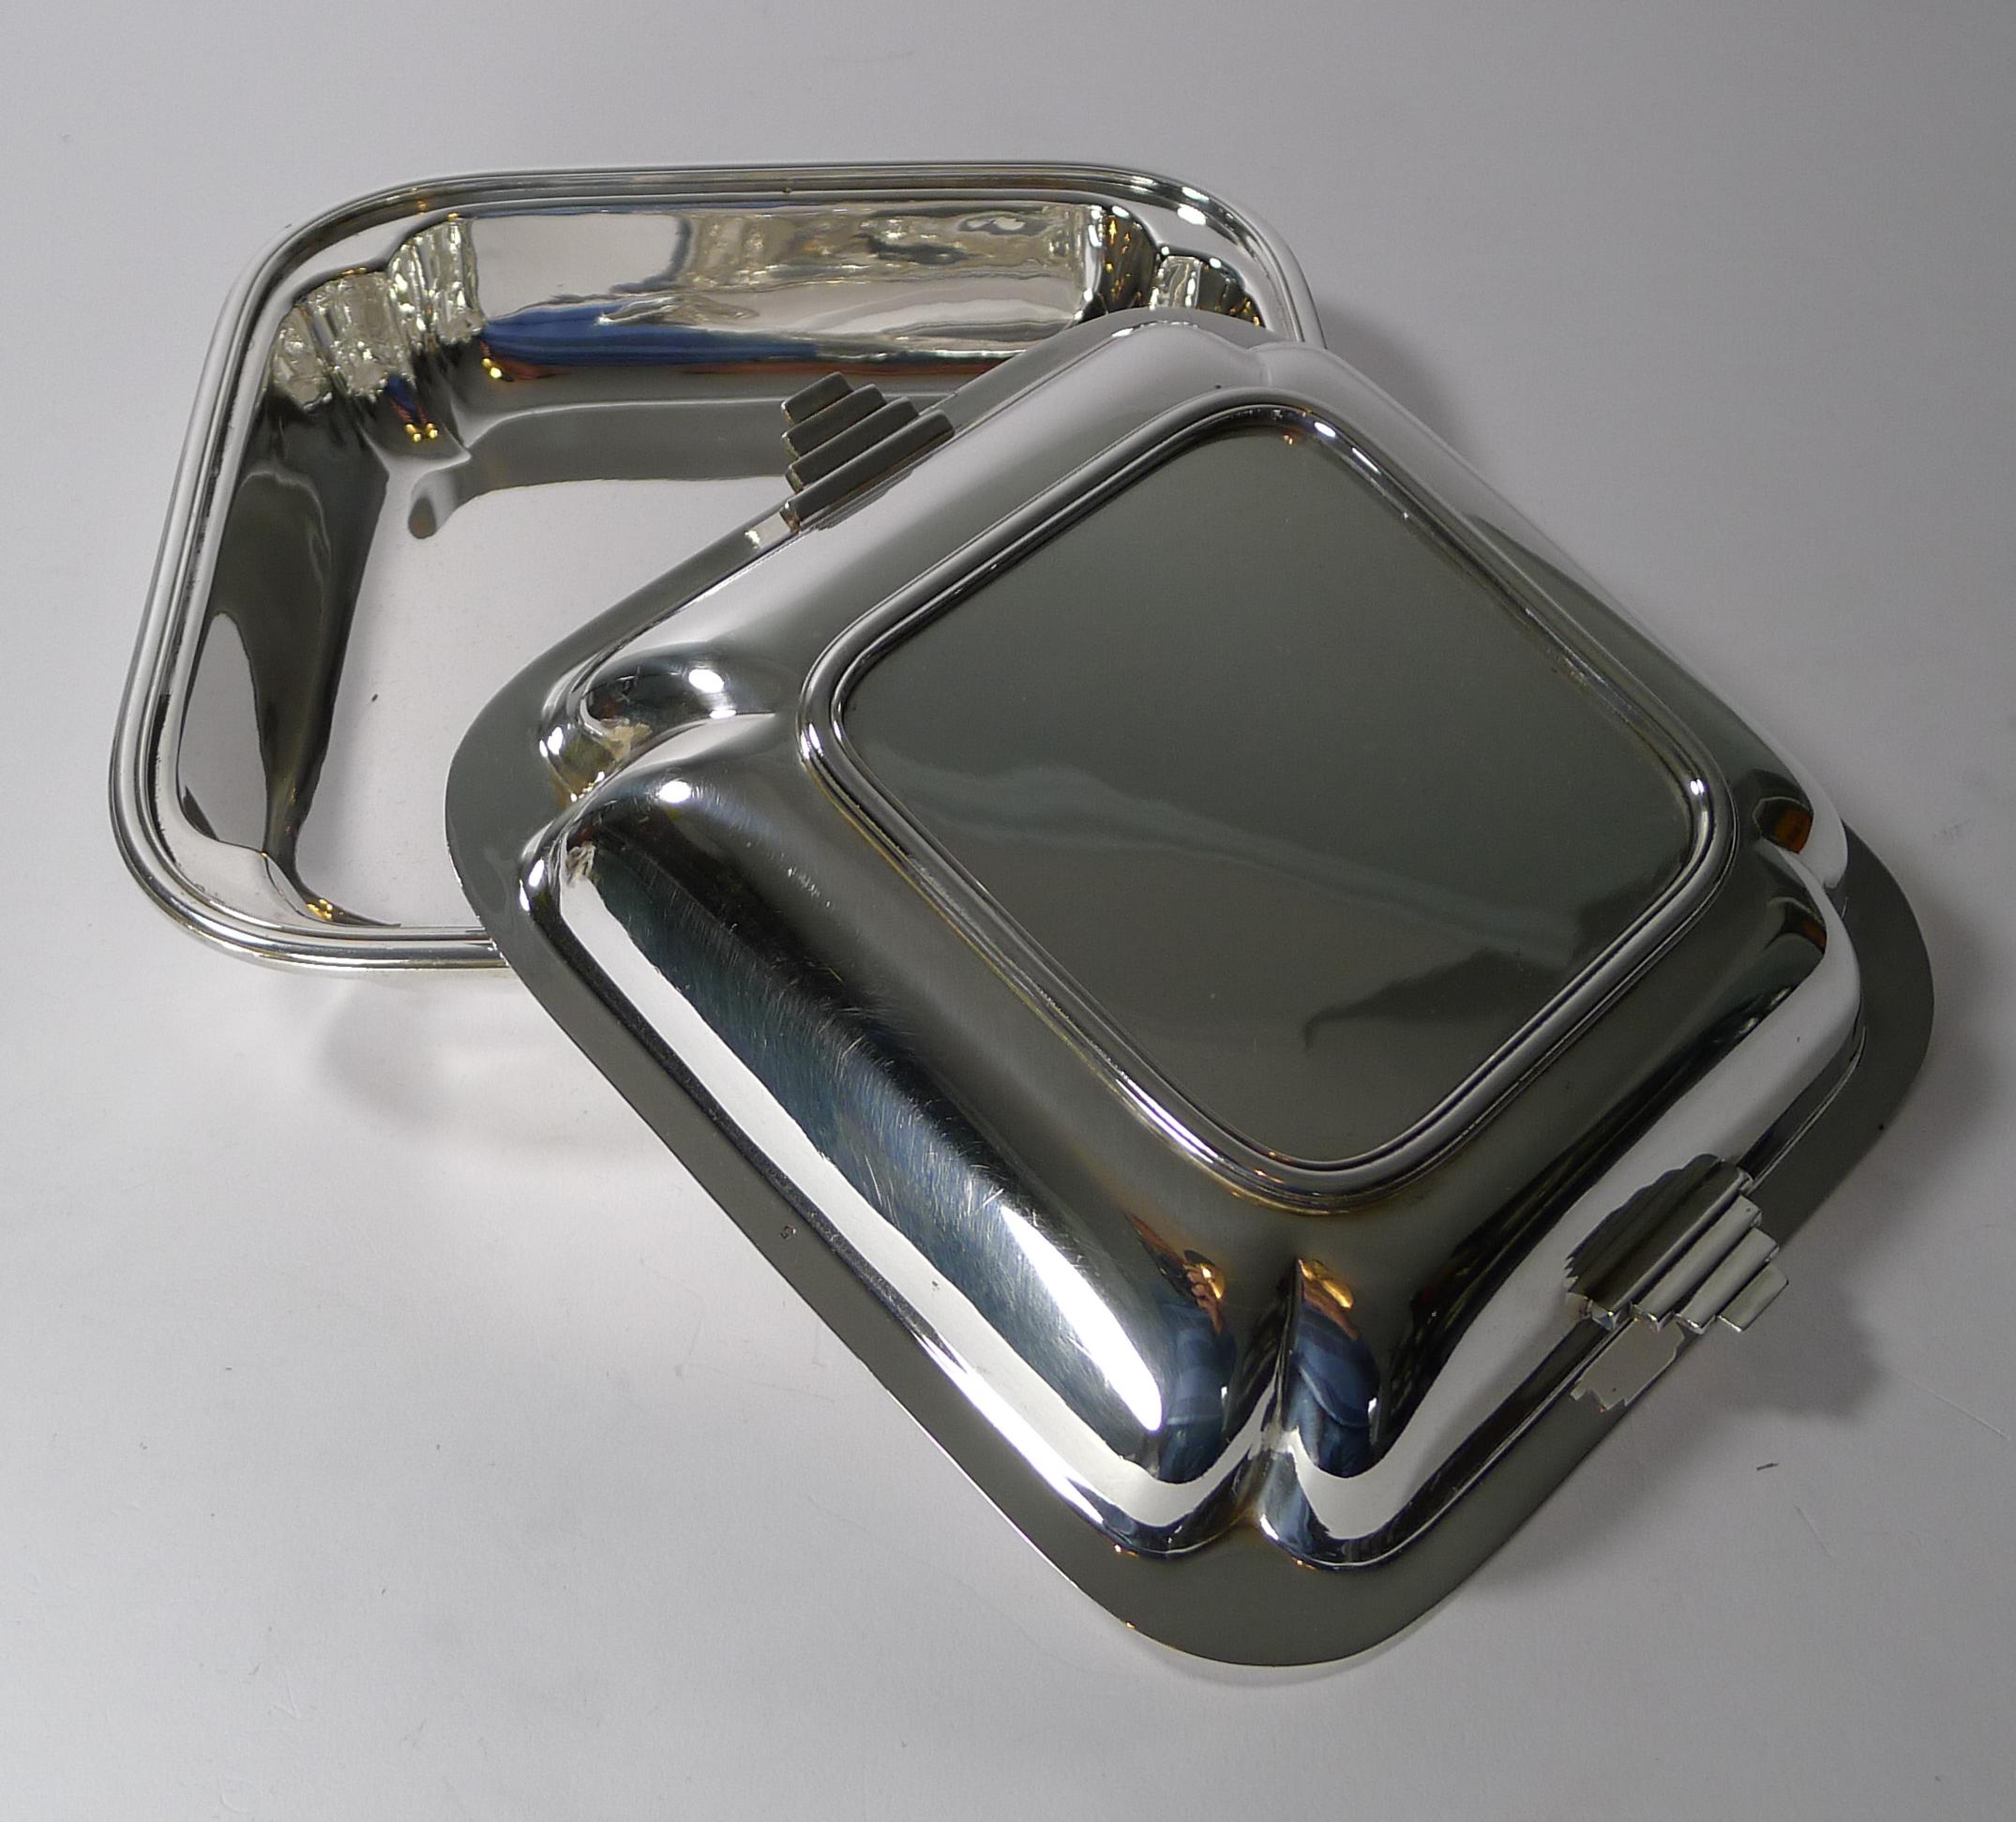 Mid-20th Century Smart English Art Deco Entree Dish, Silver Plated by W & G Sissons, circa 1930